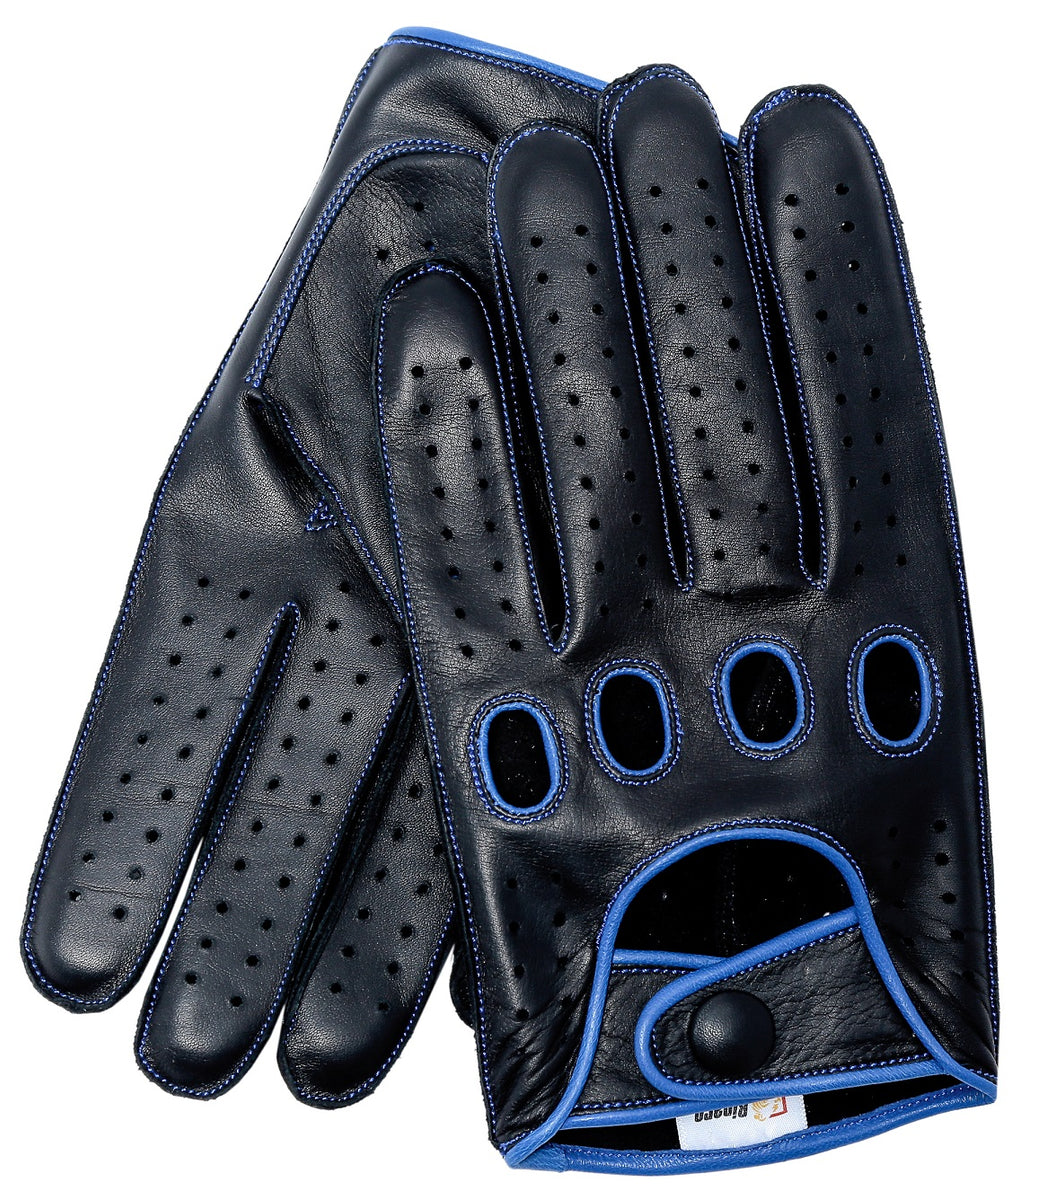 Fashion Men's Real Leather Palm-Half Gloves, Fingers Gloves, Driving Gloves